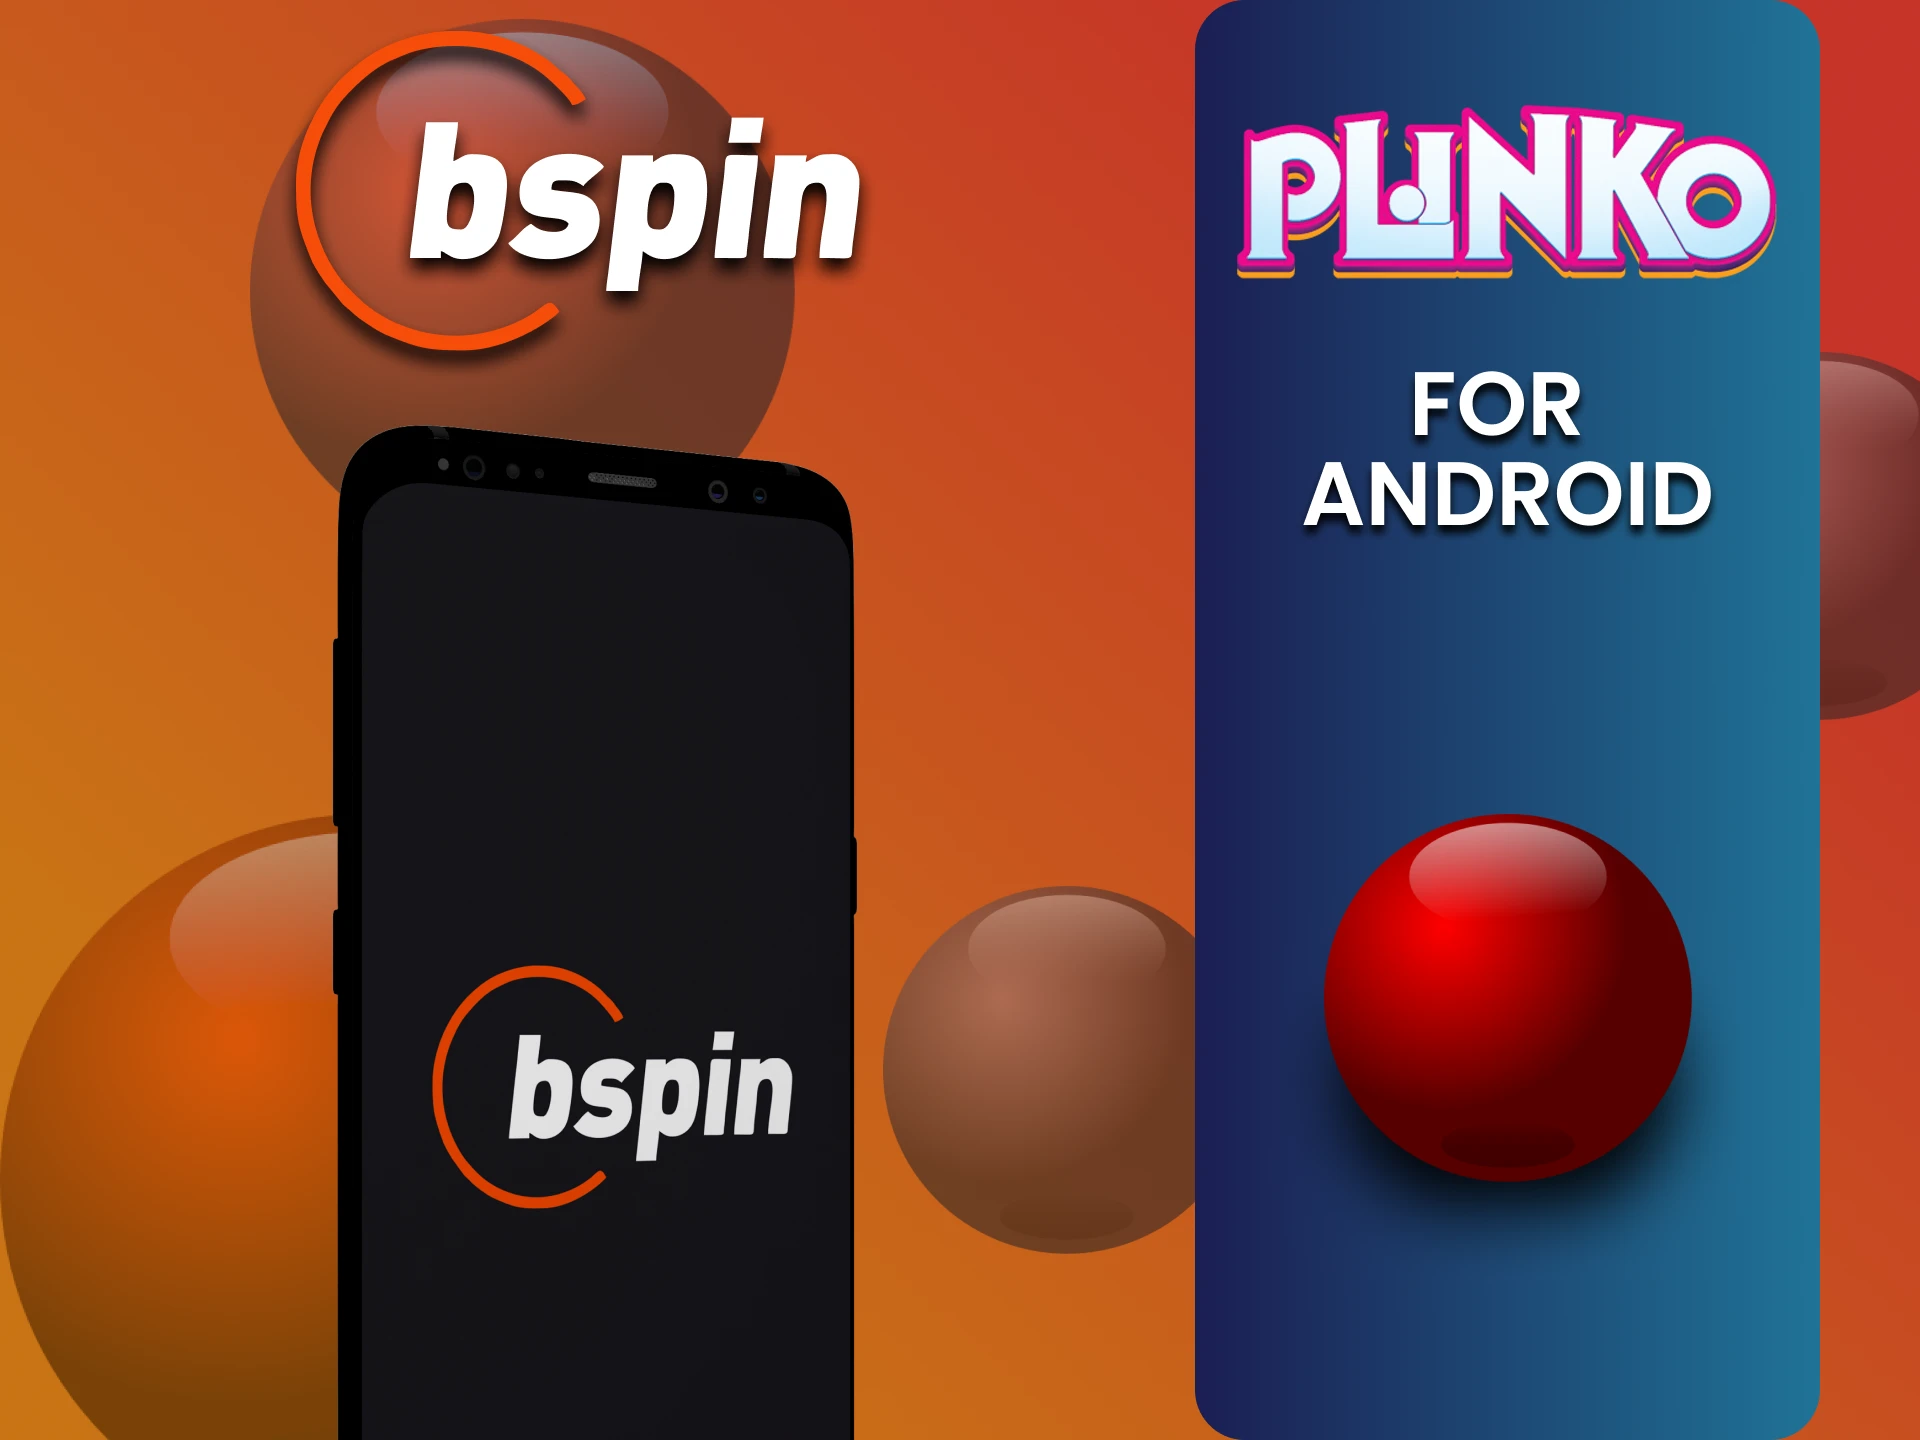 To play Plinko, download the Bspin app on Android.